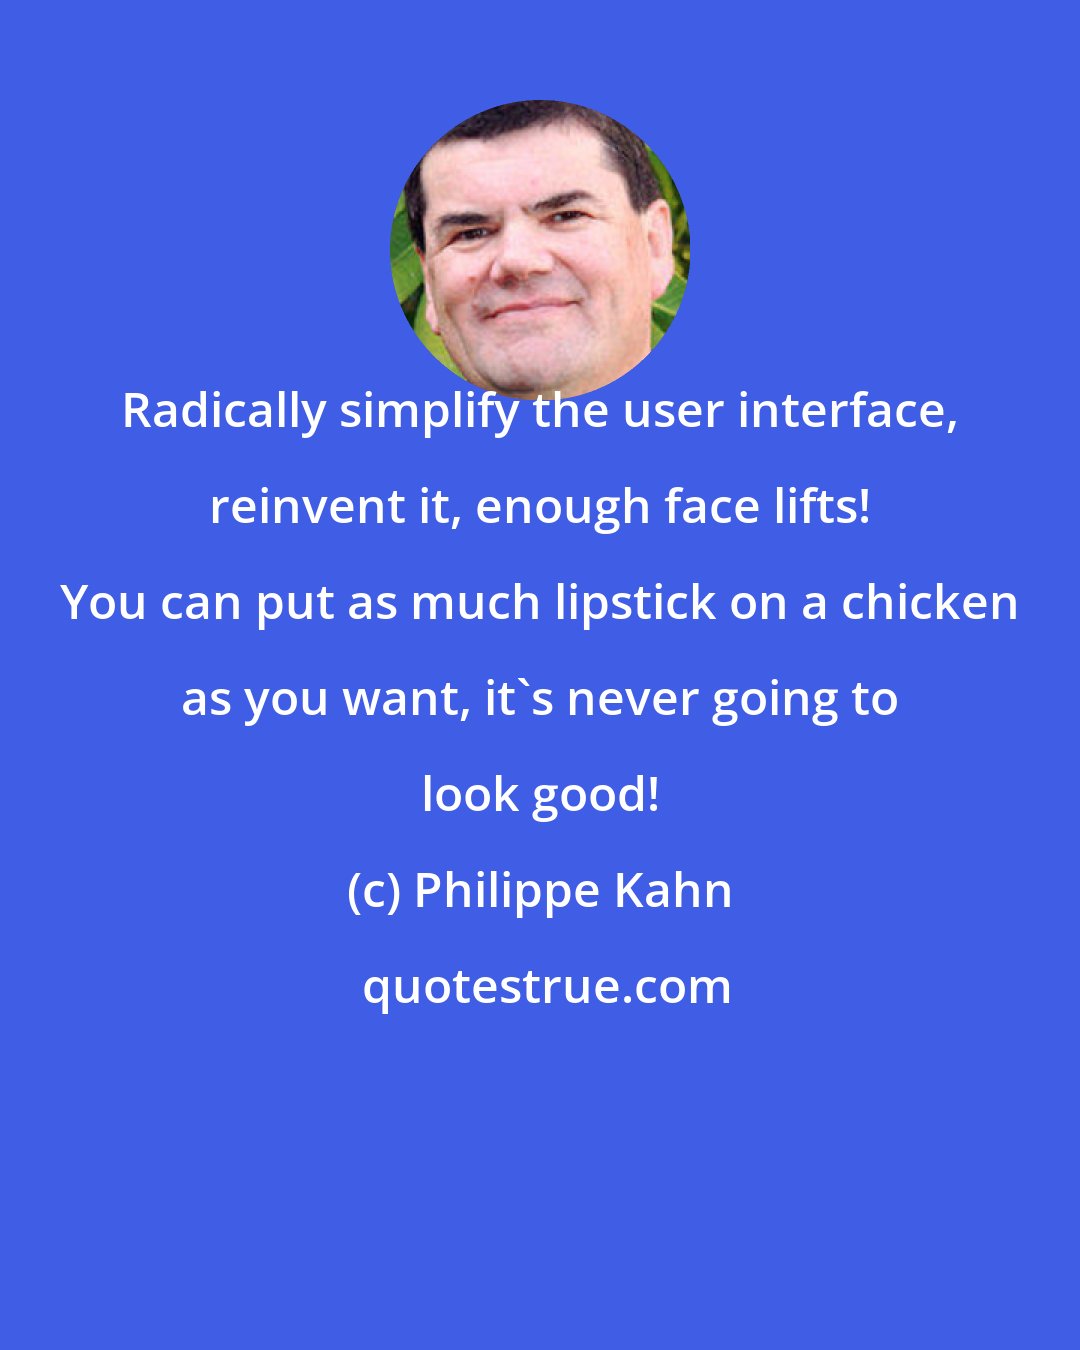 Philippe Kahn: Radically simplify the user interface, reinvent it, enough face lifts! You can put as much lipstick on a chicken as you want, it's never going to look good!